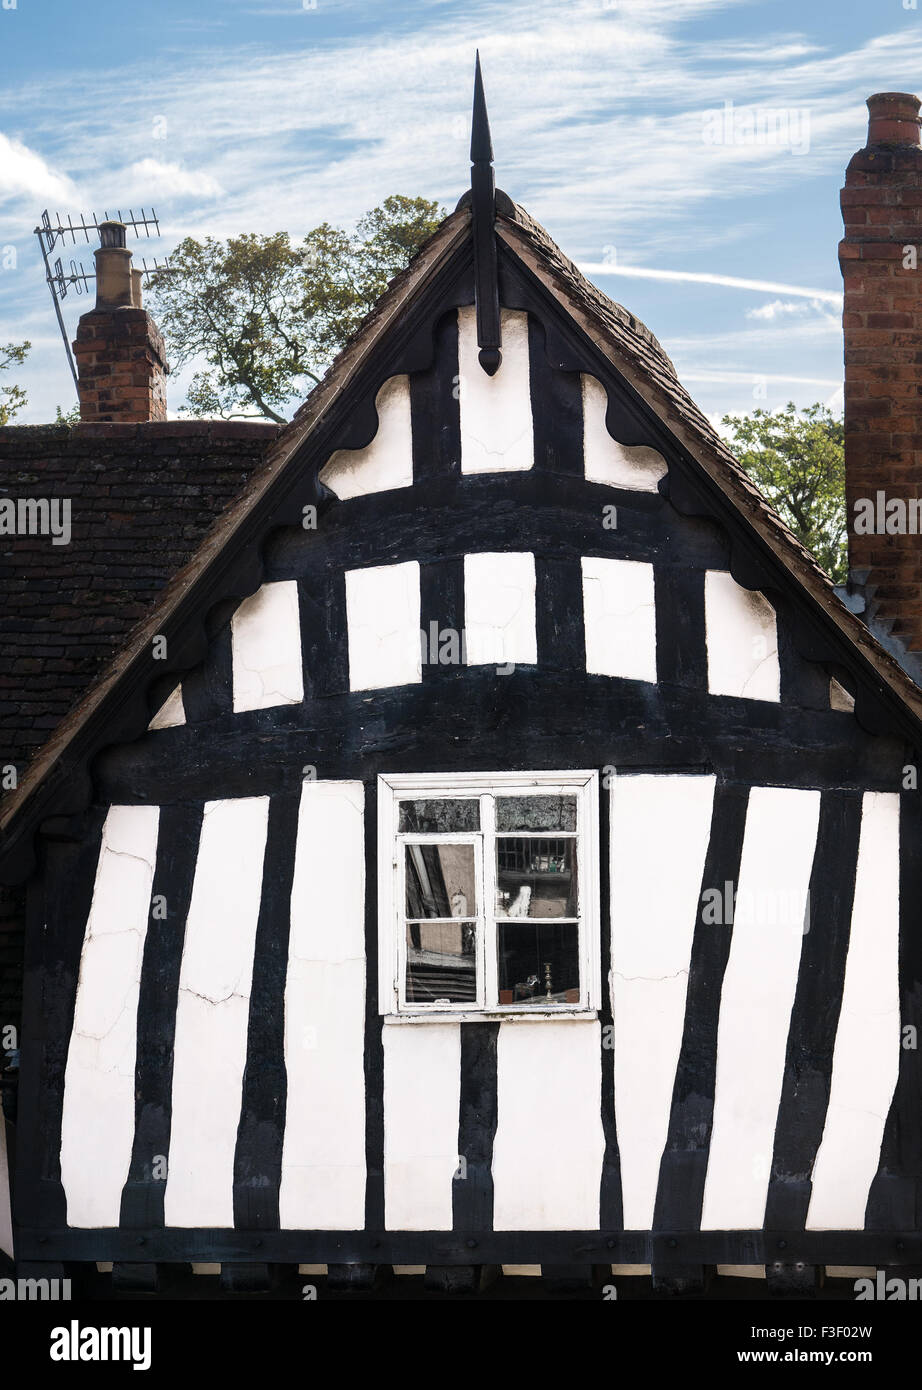 Gable end of a medieval house with a timber frame in the town of Warwick Stock Photo